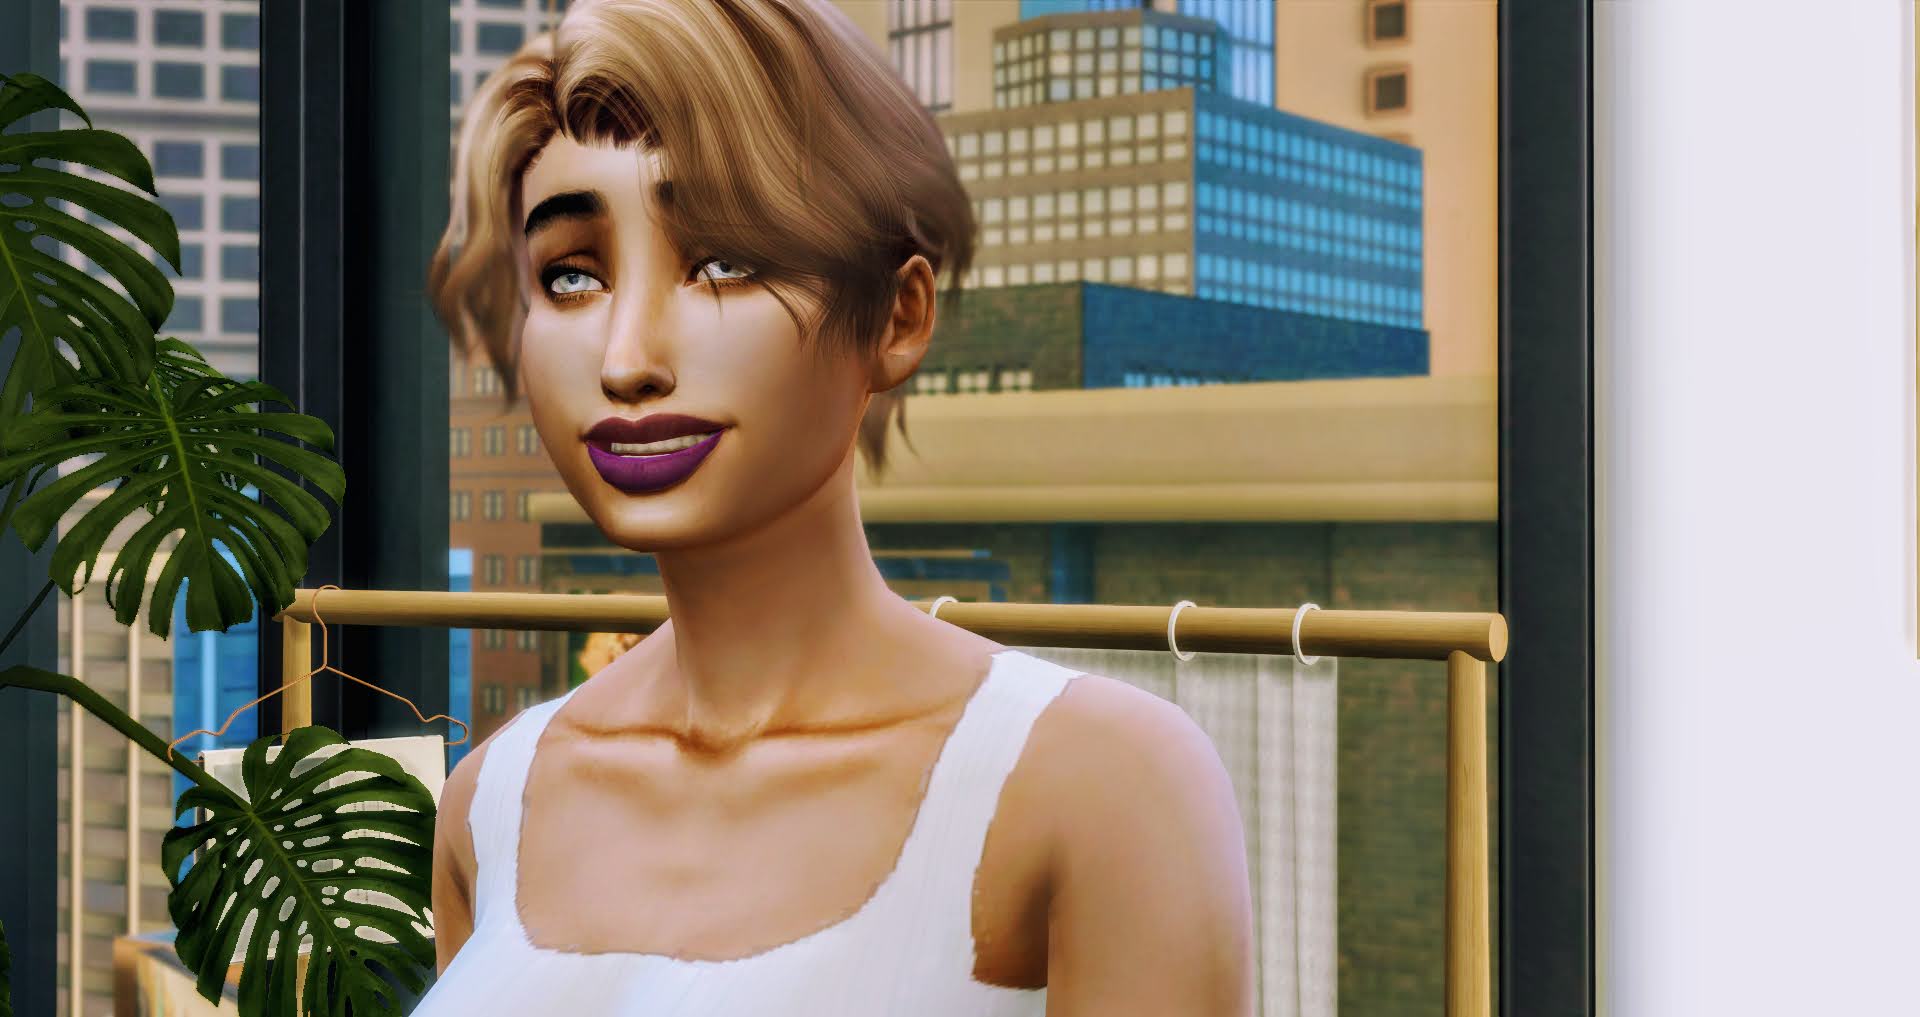 sims 4 wicked whims mods